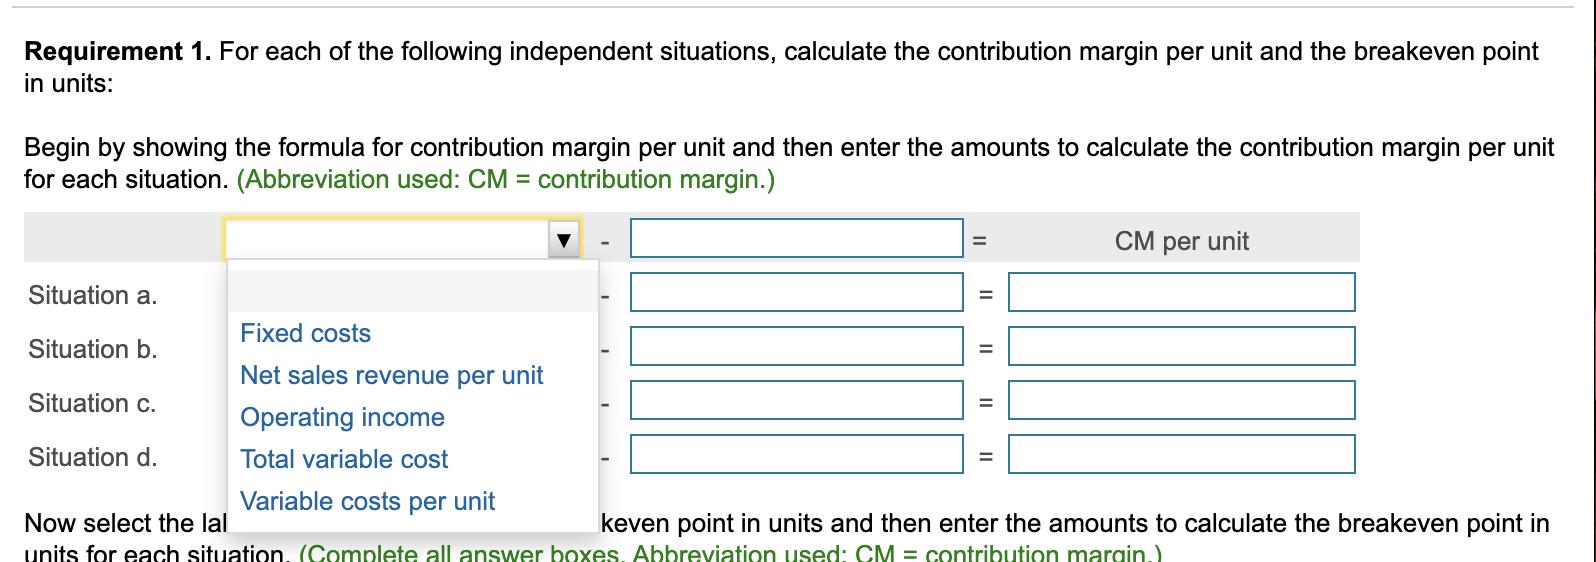 Requirement 1. For each of the following independent situations, calculate the contribution margin per unit and the breakeven